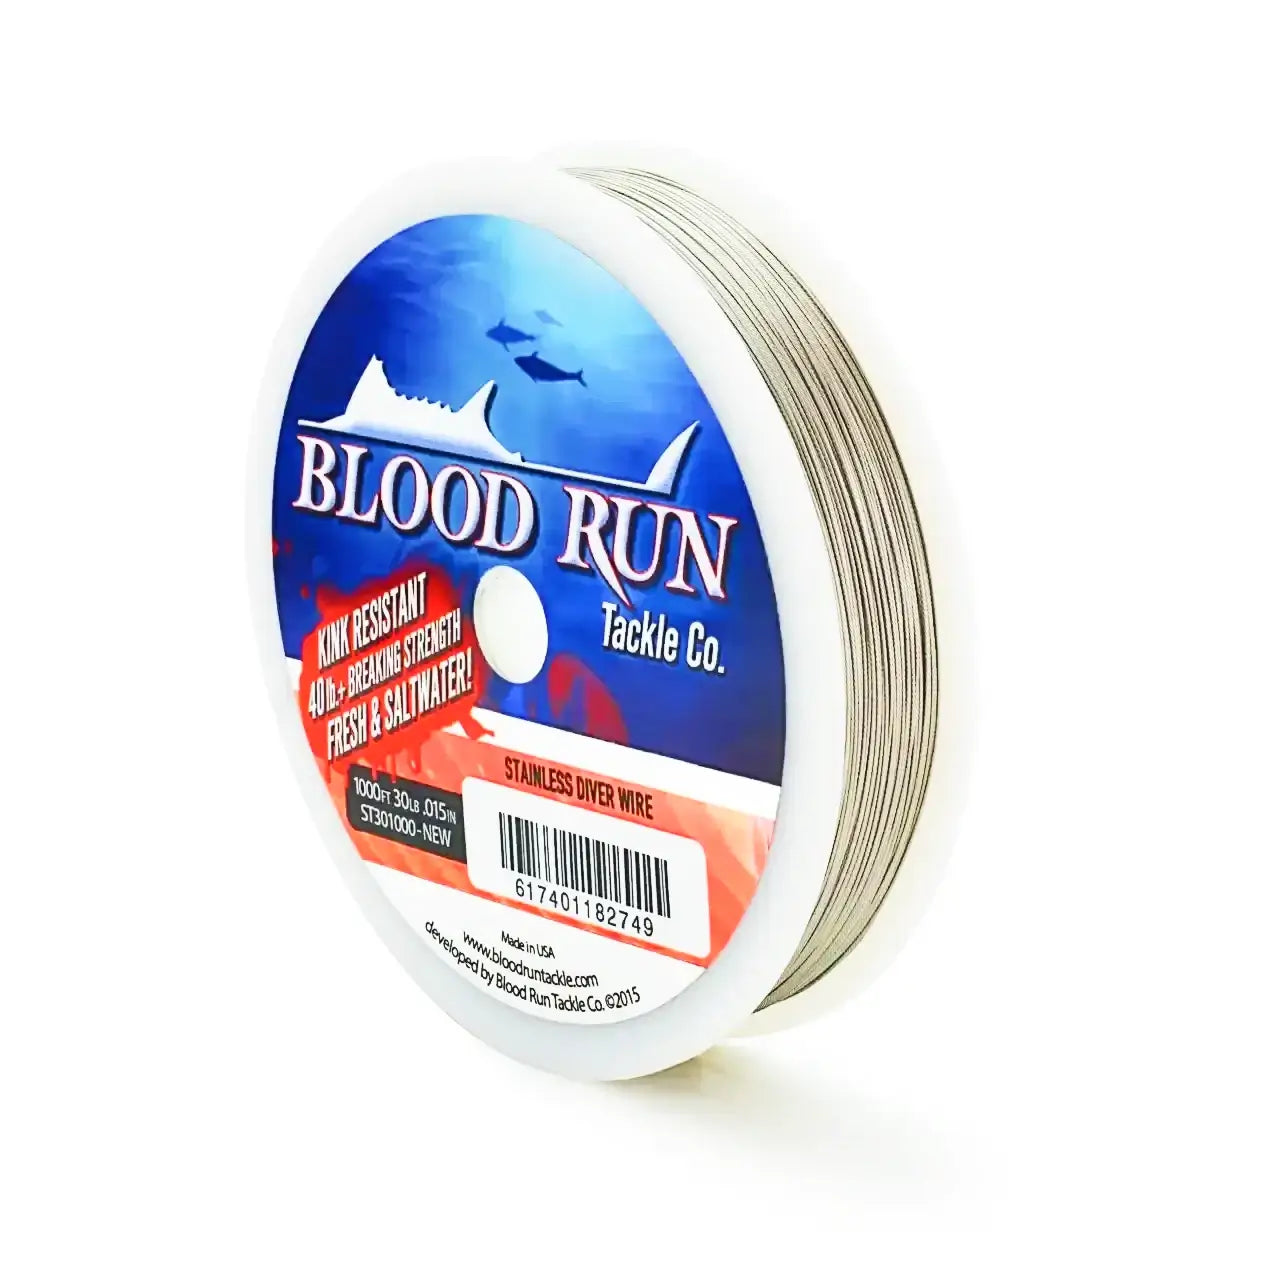 30LB Test 1000 Feet Stranded 1 x 7 Stainless Steel Fishing Wire Blood Run Fishing